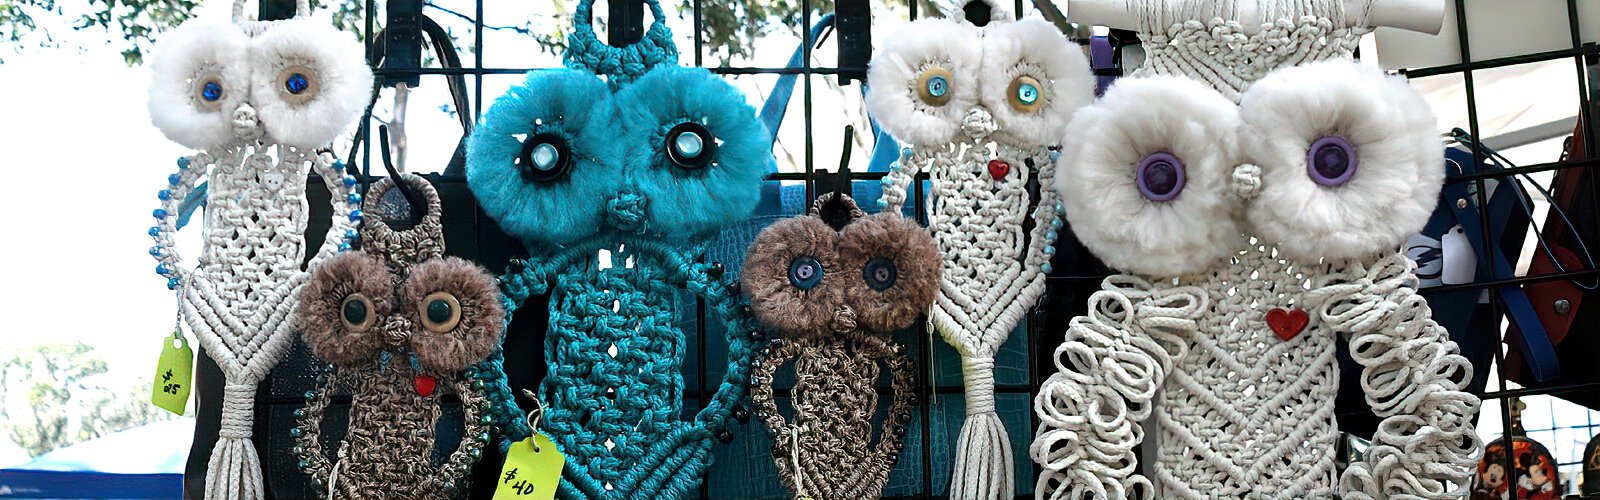 Showcased at the Sew Fine Sewing & Embroidery booth, the macrame owls of Lorraine Kaelin blend well with the other creatures of the Wonders of Wildlife estival. 